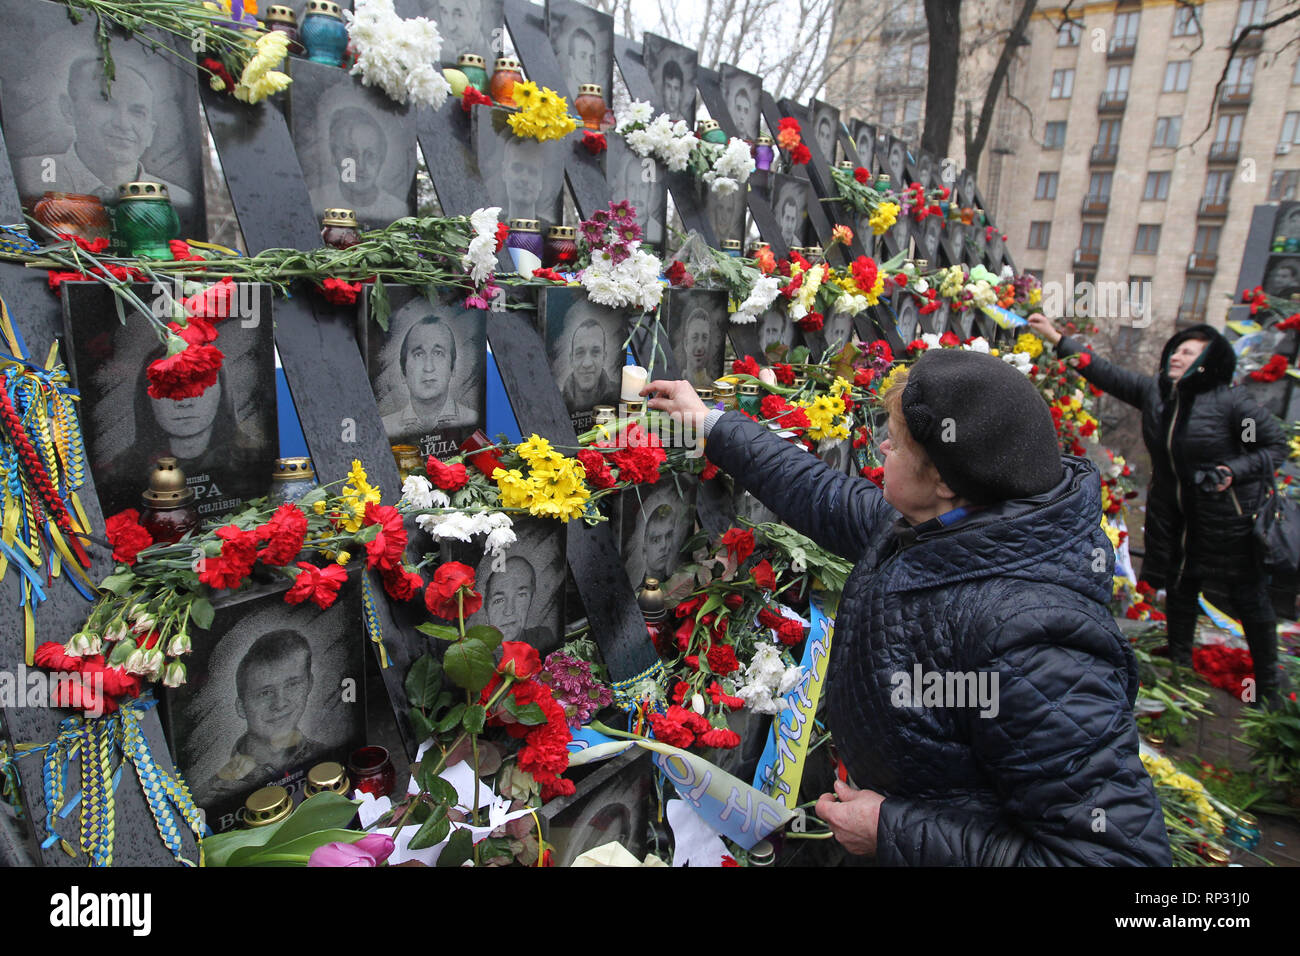 Ukrainians are seen placing flowers and lighting candles at the memorial of the Maidan activists who were killed during the 5th anniversary. Euromaidan Revolution or Revolution of Dignity was a wave of demonstrations and civil unrest in Ukraine, which began on the night of 21 November 2013 with public protests at the Independence Square in Kiev, demanding European integration. The protests led to the 2014 Ukrainian revolution and the ouster of President Viktor Yanukovych. Stock Photo